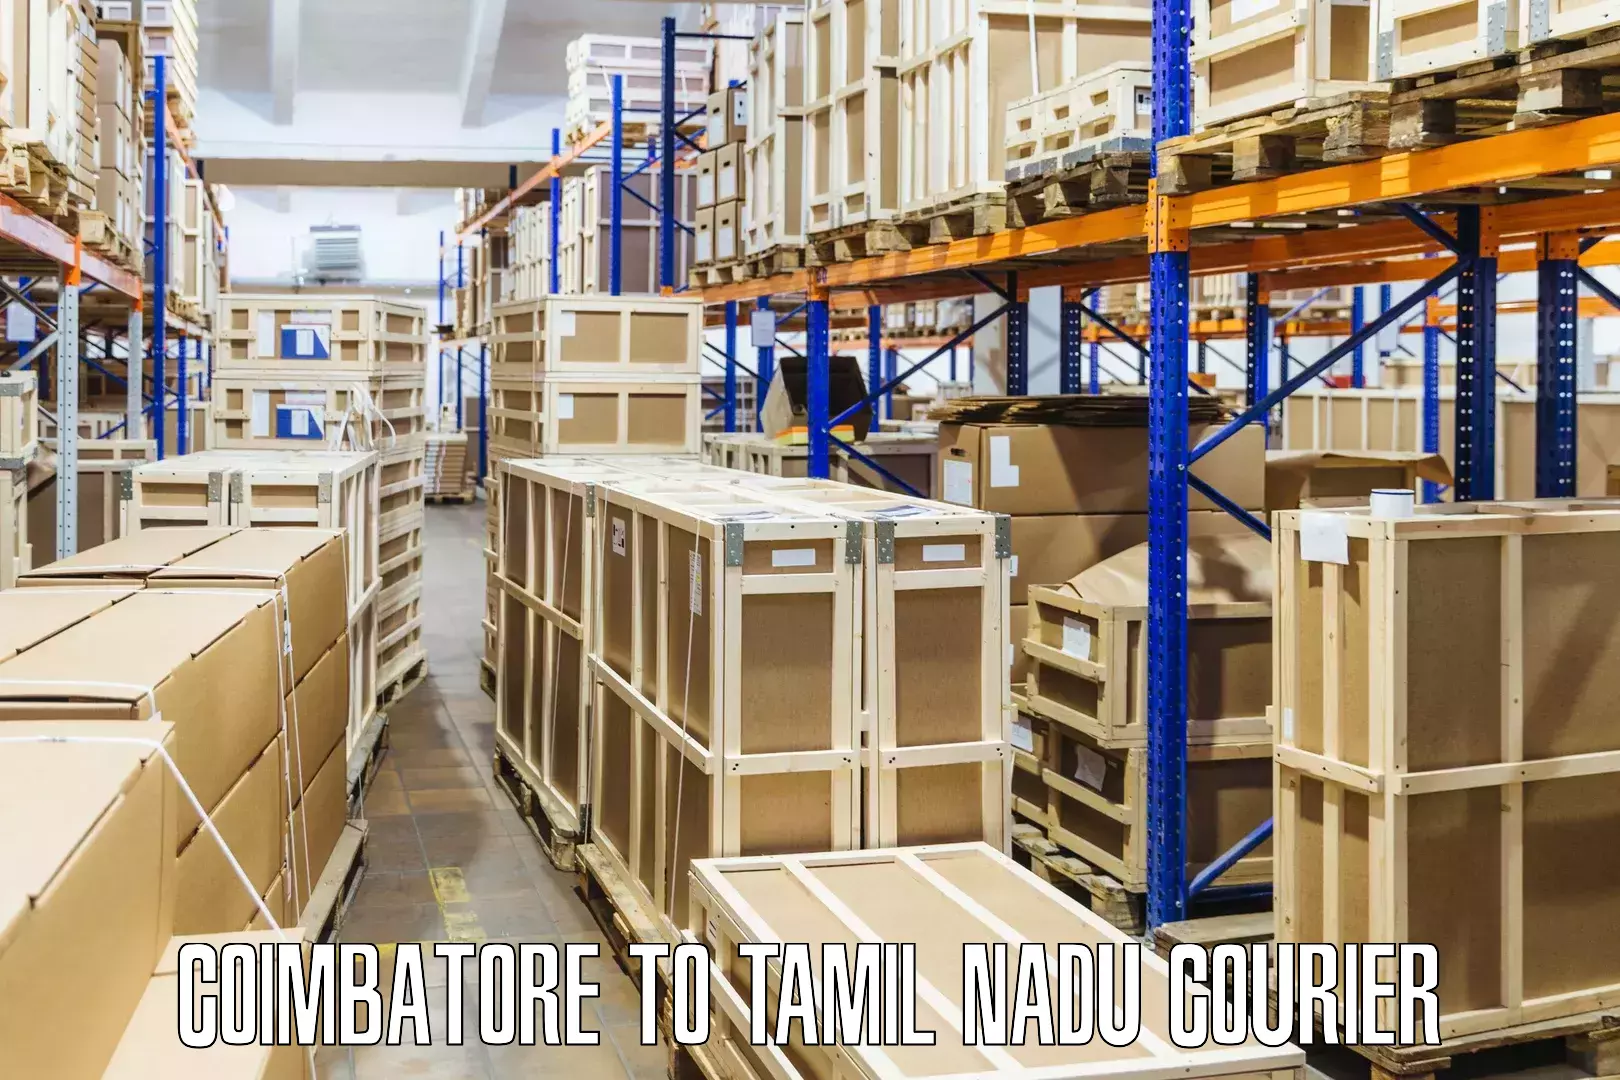 Reliable shipping partners Coimbatore to Vellore Institute of Technology